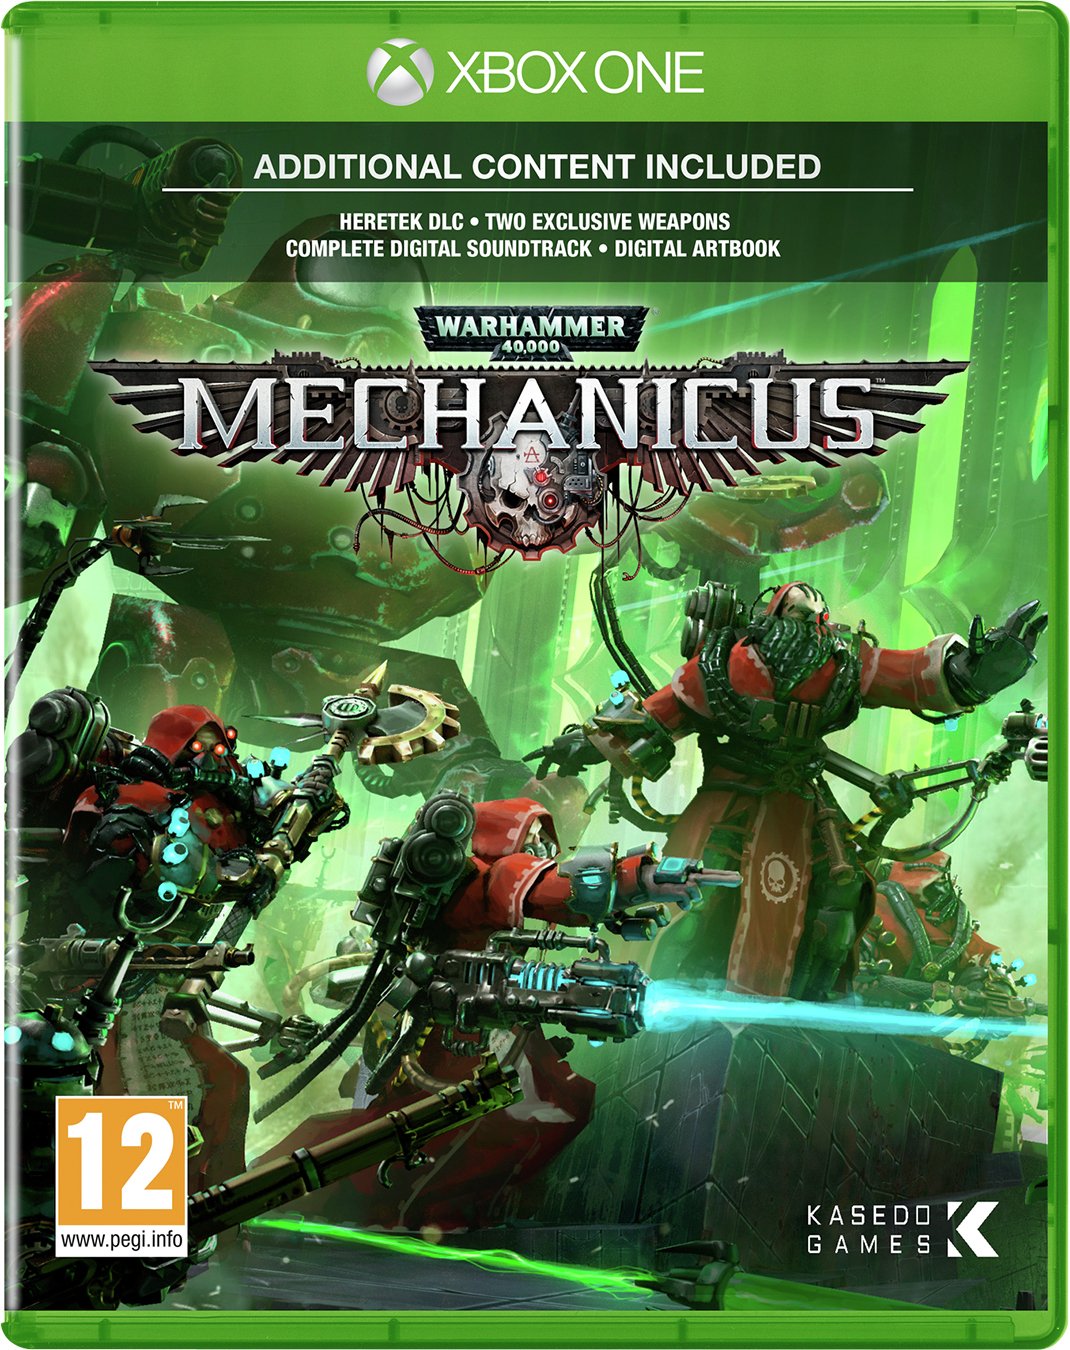 Warhammer 40,000: Mechanicus Xbox One Game Pre-Order Review